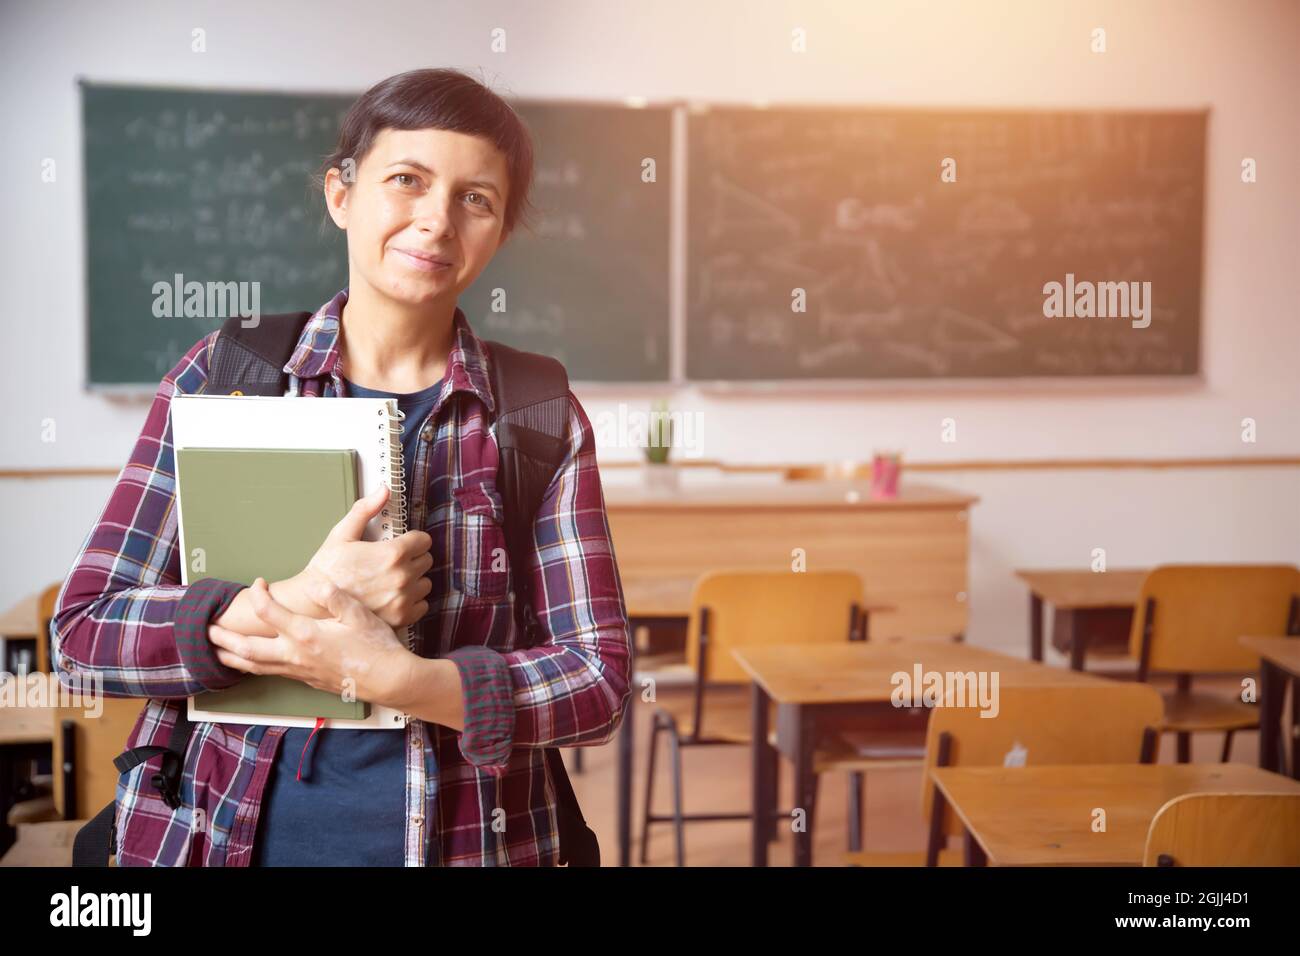 Smiling student girl wearing school backpack and holding exercise book in classroom Stock Photo